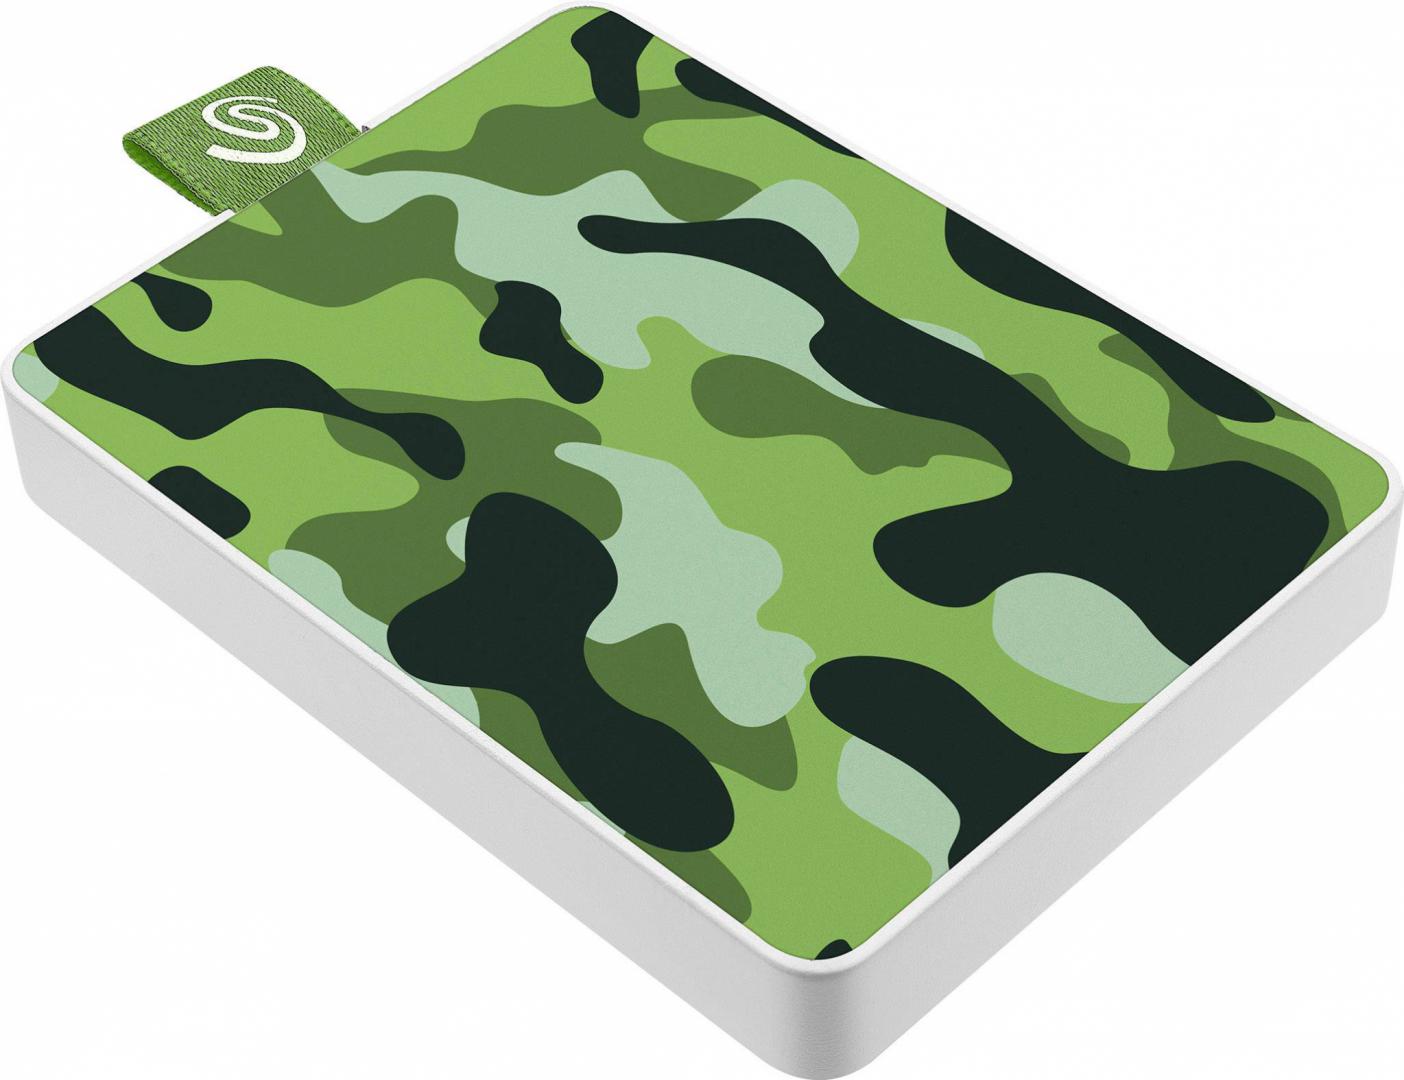 SSD Extern Seagate One Touch 500GB, verde, USB 3.0